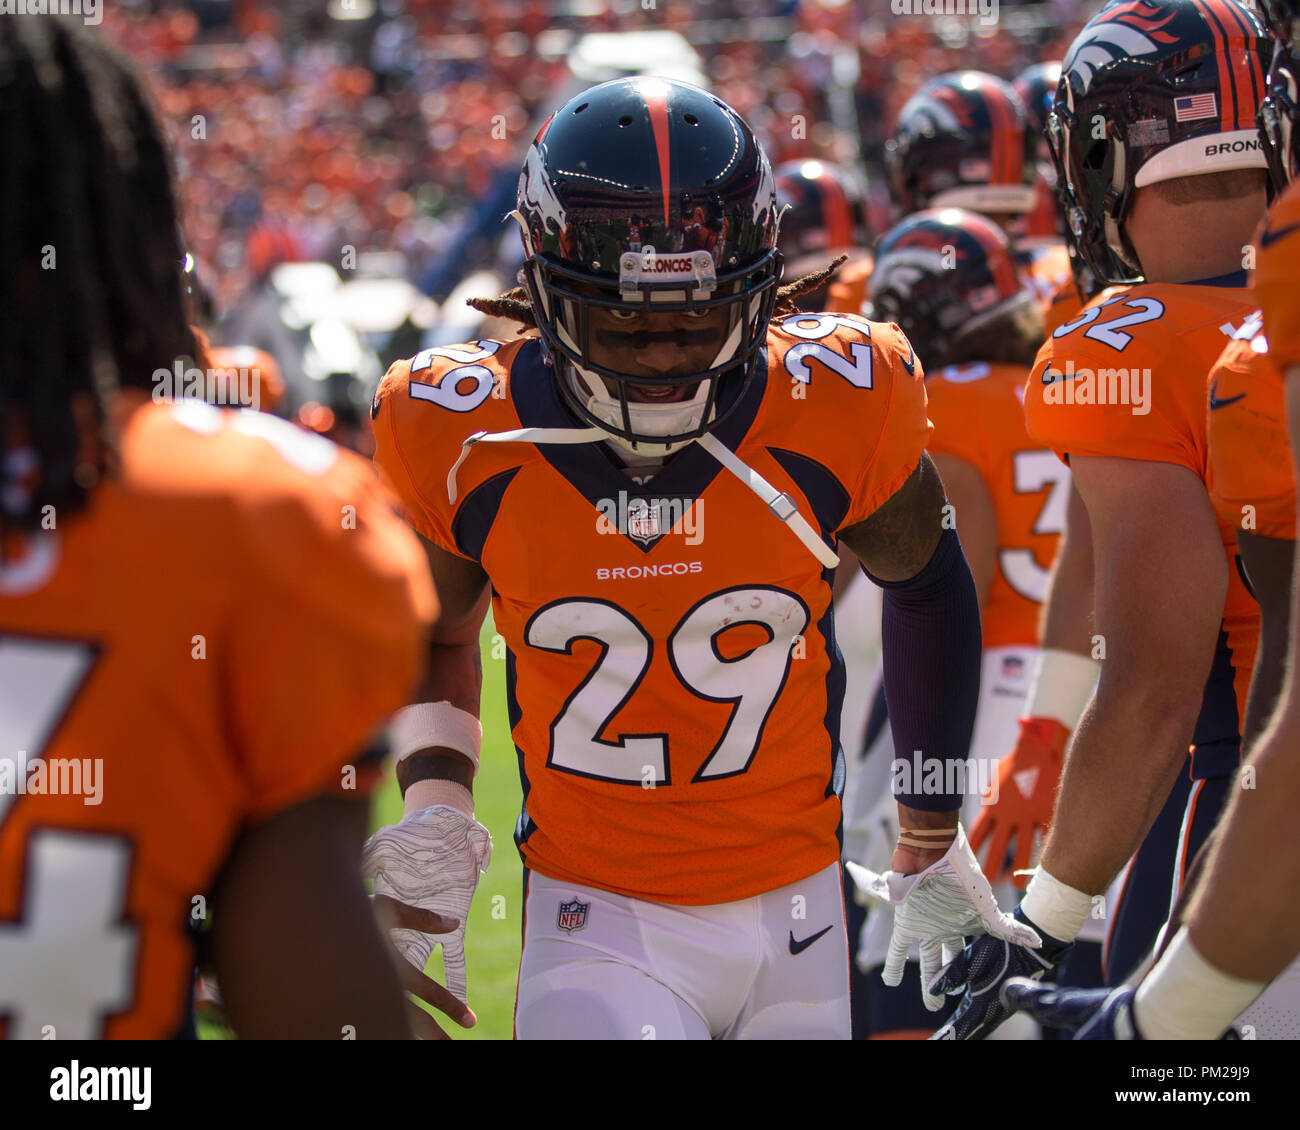 Denver, USA. September 16, 2018: Denver Broncos defensive back Bradley Roby (29) during opening ceremonies of an NFL matchup between the Oakland Raiders and the Denver Broncos at Broncos Stadium at Mile High Denver CO, Scott D Stivason/Cal Sport Media Credit: Cal Sport Media/Alamy Live News Stock Photo